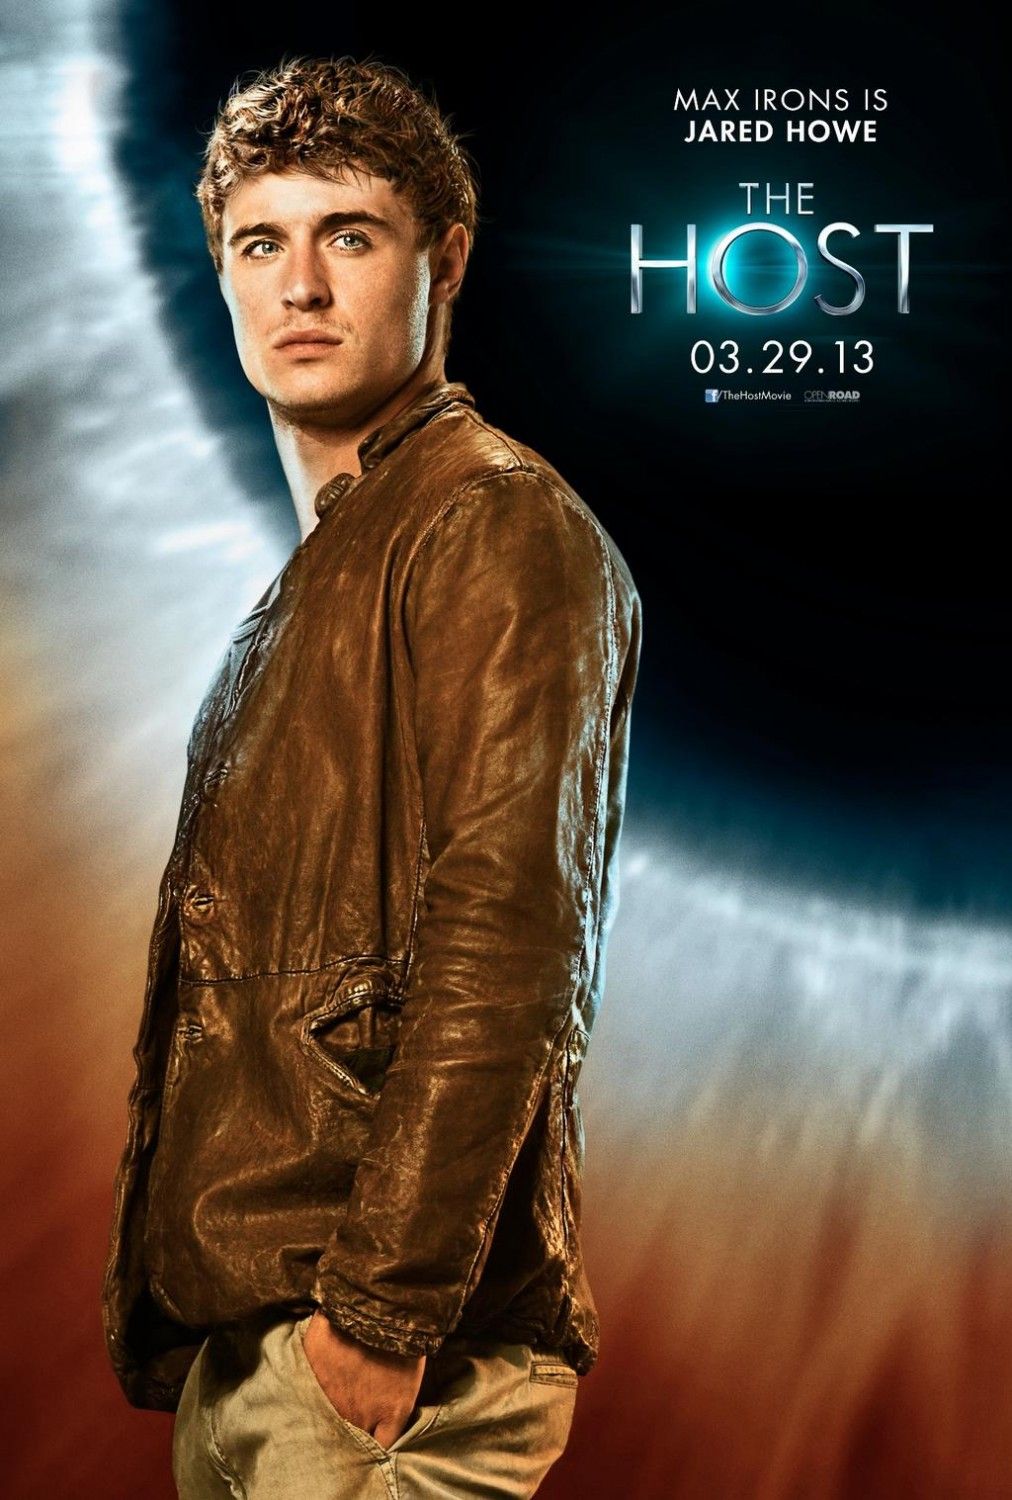 The Host Character Poster Max Irons